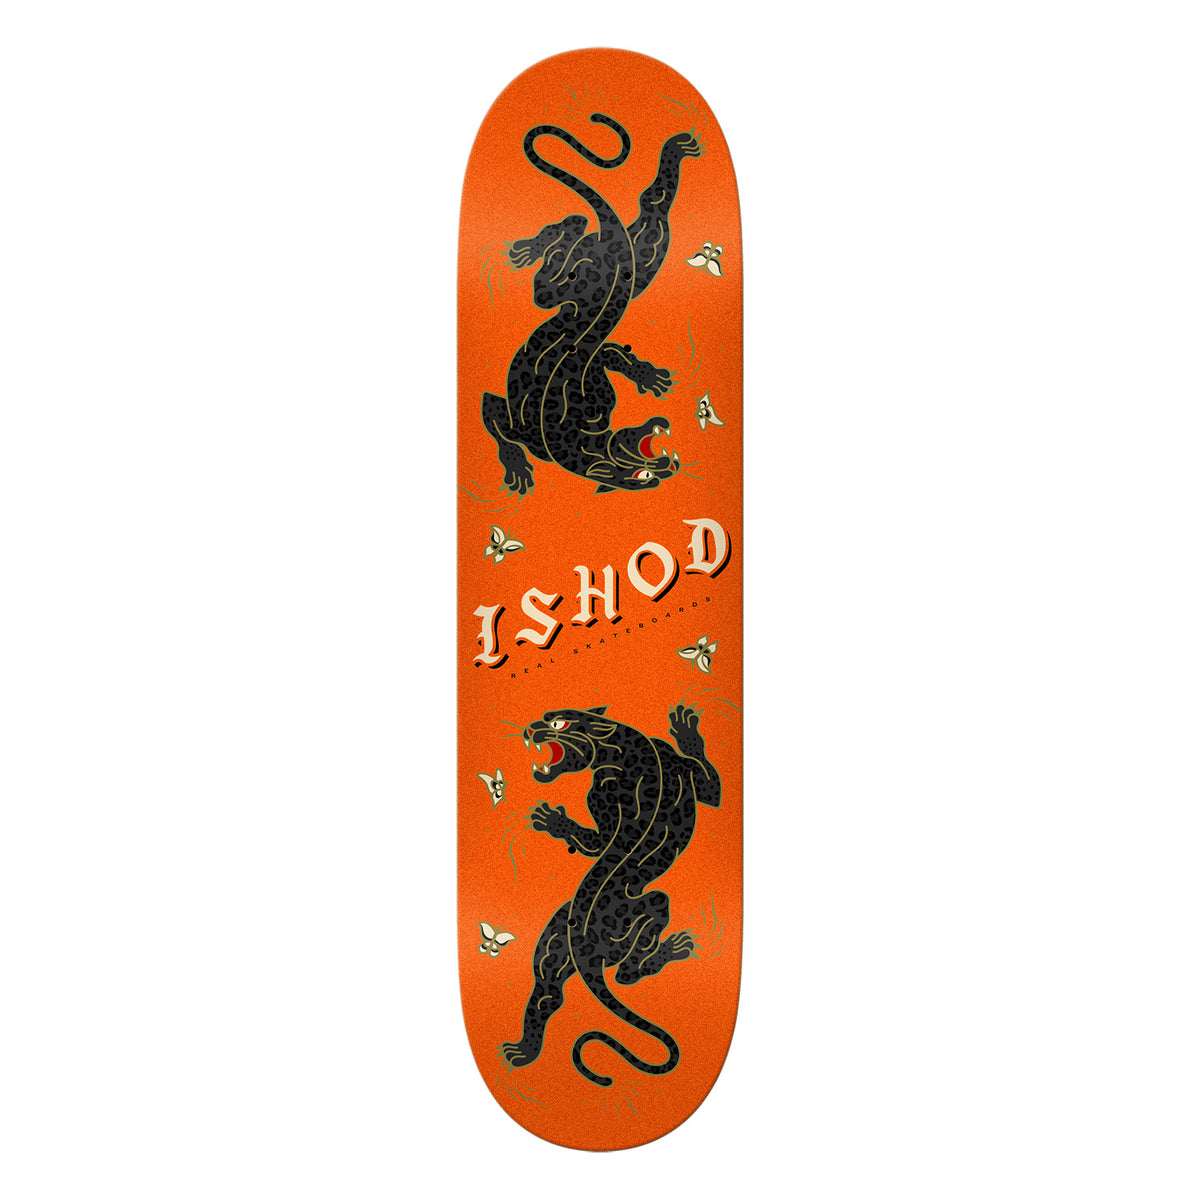 Real Ishod Wair Cat Scratch Twin Tail Slick Deck